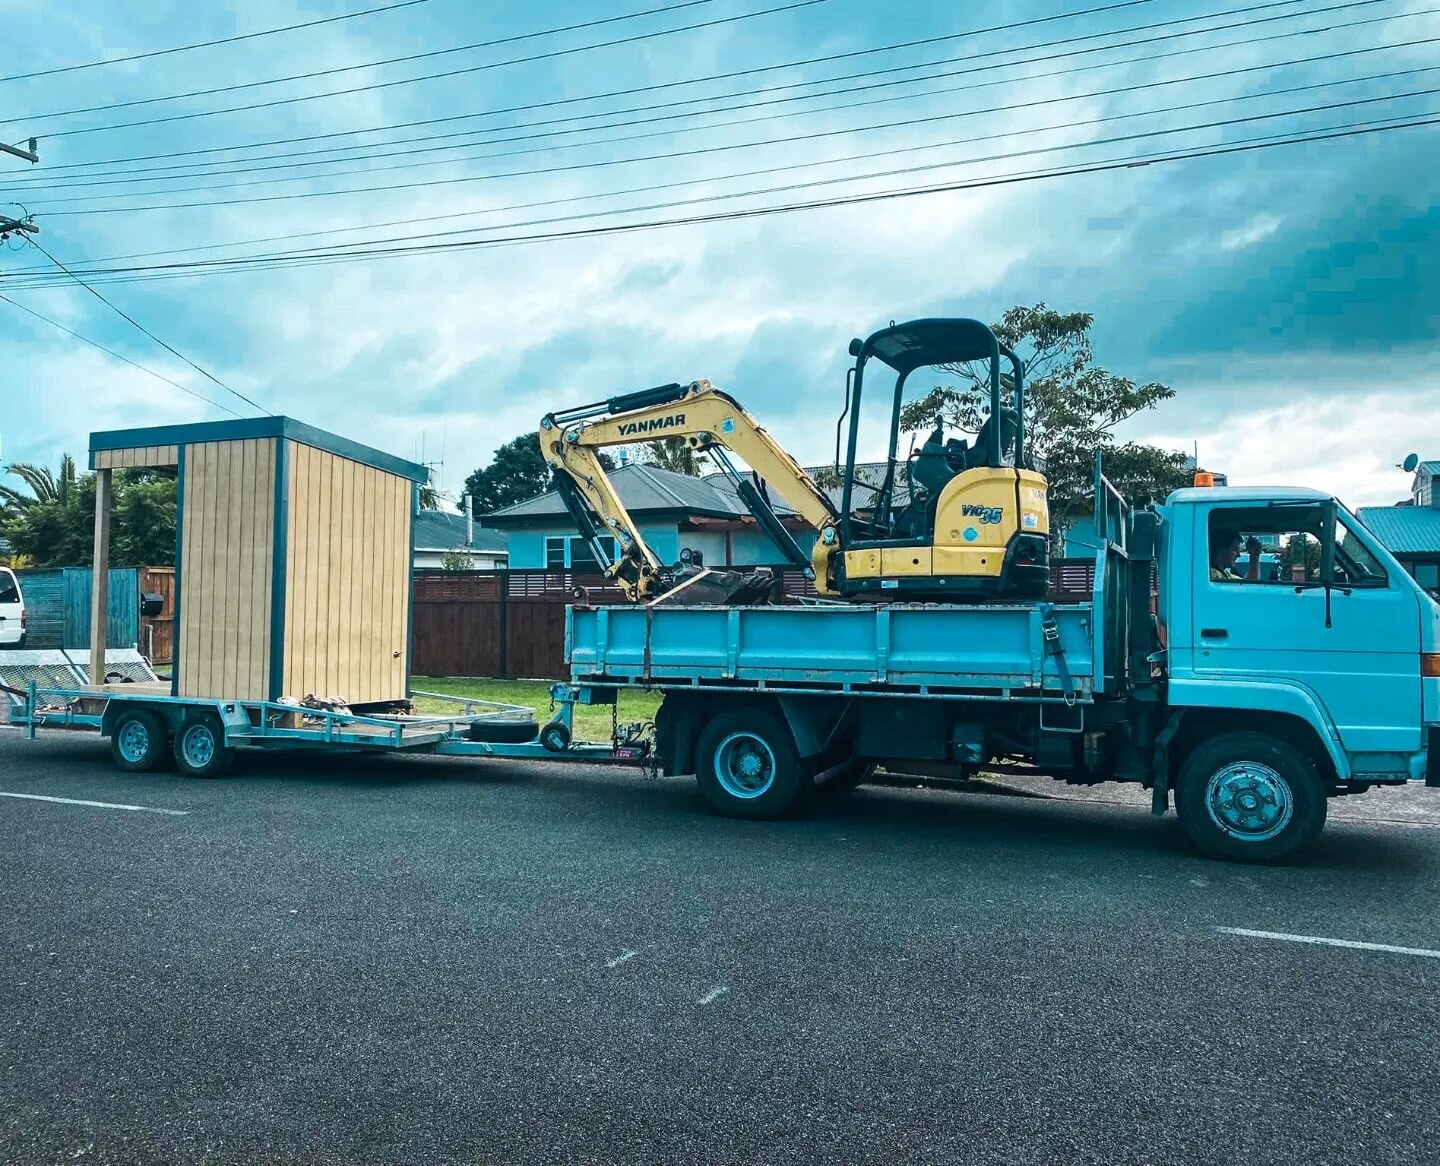 Orchard toilet enroute to its new home among the kiwis 🥝 
.
.
.
#taurangabuilders #down-to-earth #builders #orchardtoilets #orchardloo #deckinspo #construction #carpentry #home #constructionlife #tools #excavator #house